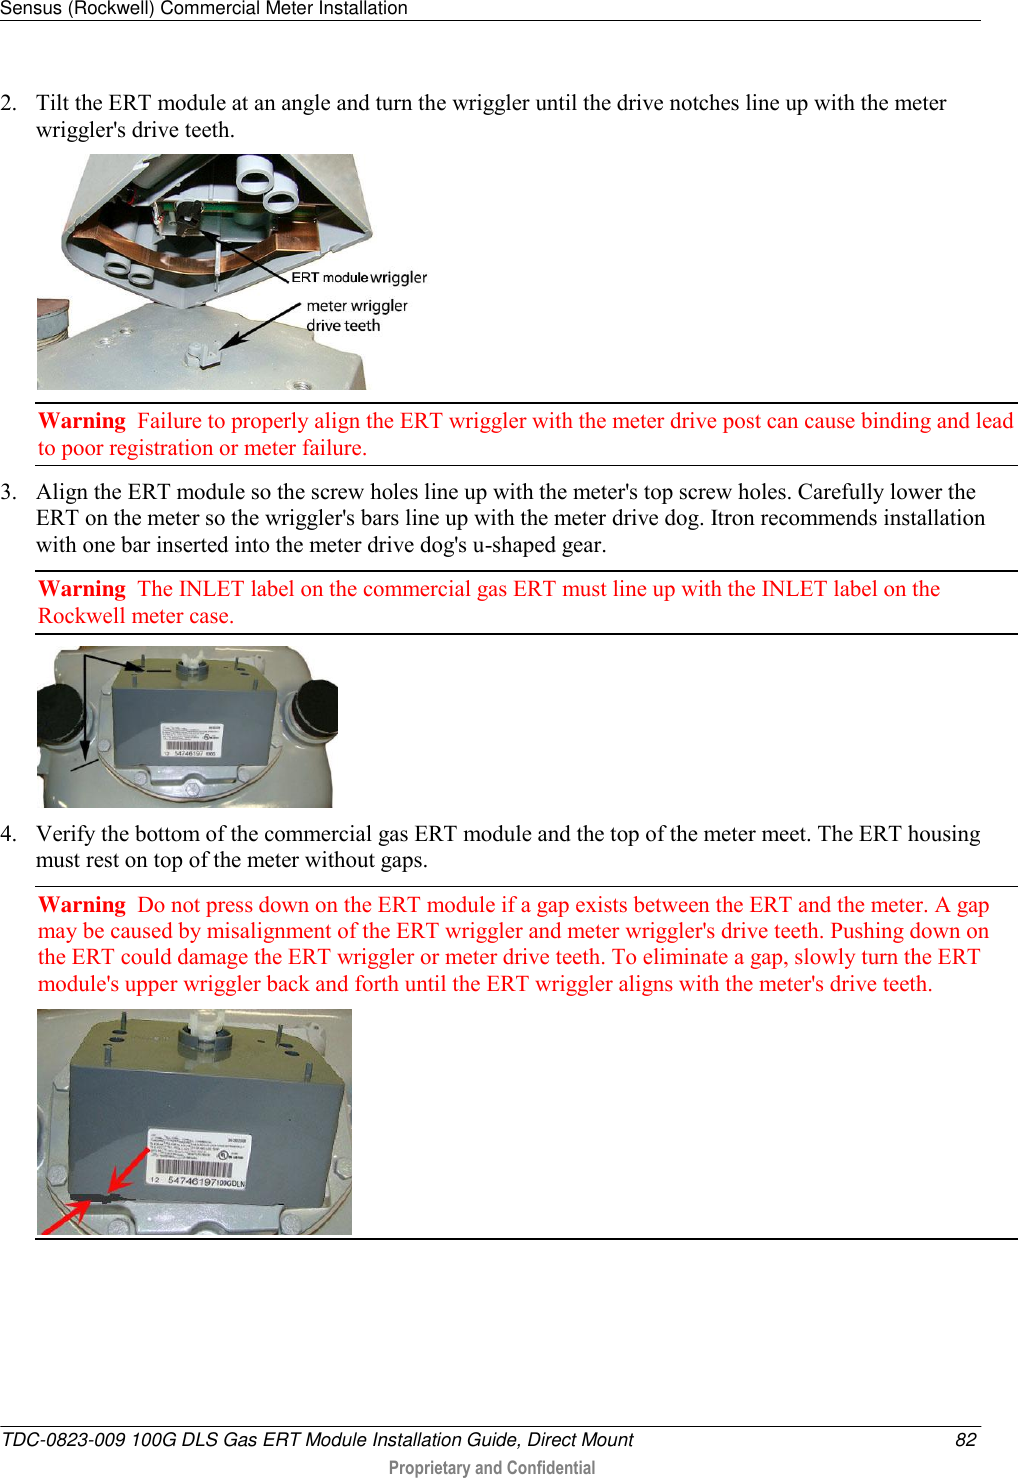 Sensus (Rockwell) Commercial Meter Installation   TDC-0823-009 100G DLS Gas ERT Module Installation Guide, Direct Mount  82  Proprietary and Confidential    2. Tilt the ERT module at an angle and turn the wriggler until the drive notches line up with the meter wriggler&apos;s drive teeth.  Warning  Failure to properly align the ERT wriggler with the meter drive post can cause binding and lead to poor registration or meter failure.   3. Align the ERT module so the screw holes line up with the meter&apos;s top screw holes. Carefully lower the ERT on the meter so the wriggler&apos;s bars line up with the meter drive dog. Itron recommends installation with one bar inserted into the meter drive dog&apos;s u-shaped gear. Warning  The INLET label on the commercial gas ERT must line up with the INLET label on the Rockwell meter case.  4. Verify the bottom of the commercial gas ERT module and the top of the meter meet. The ERT housing must rest on top of the meter without gaps. Warning  Do not press down on the ERT module if a gap exists between the ERT and the meter. A gap may be caused by misalignment of the ERT wriggler and meter wriggler&apos;s drive teeth. Pushing down on the ERT could damage the ERT wriggler or meter drive teeth. To eliminate a gap, slowly turn the ERT module&apos;s upper wriggler back and forth until the ERT wriggler aligns with the meter&apos;s drive teeth.  